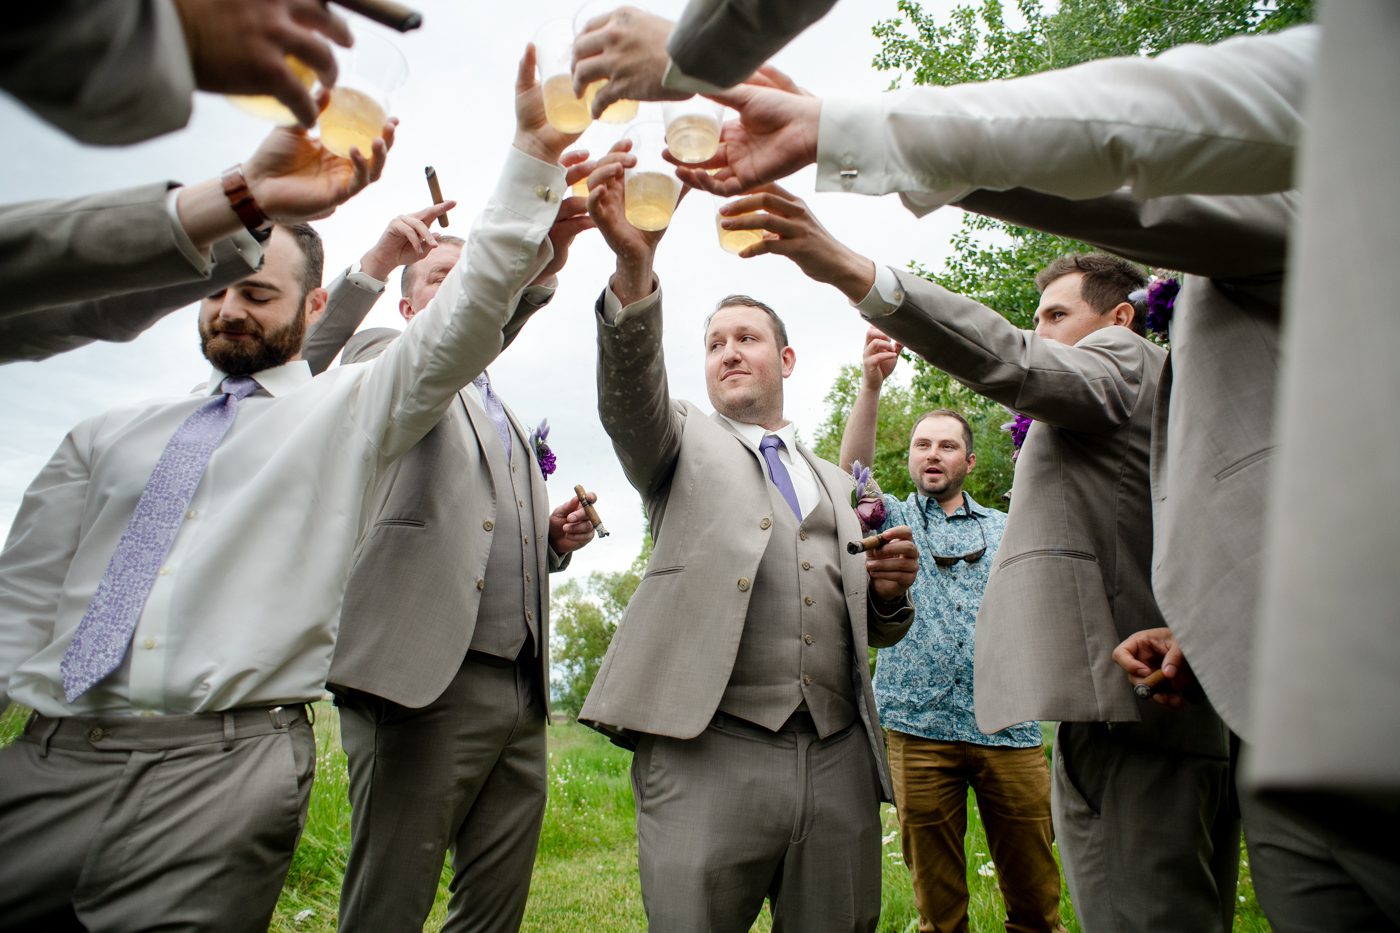 bourbon-toasts-to-the-groom-at-roys-barn